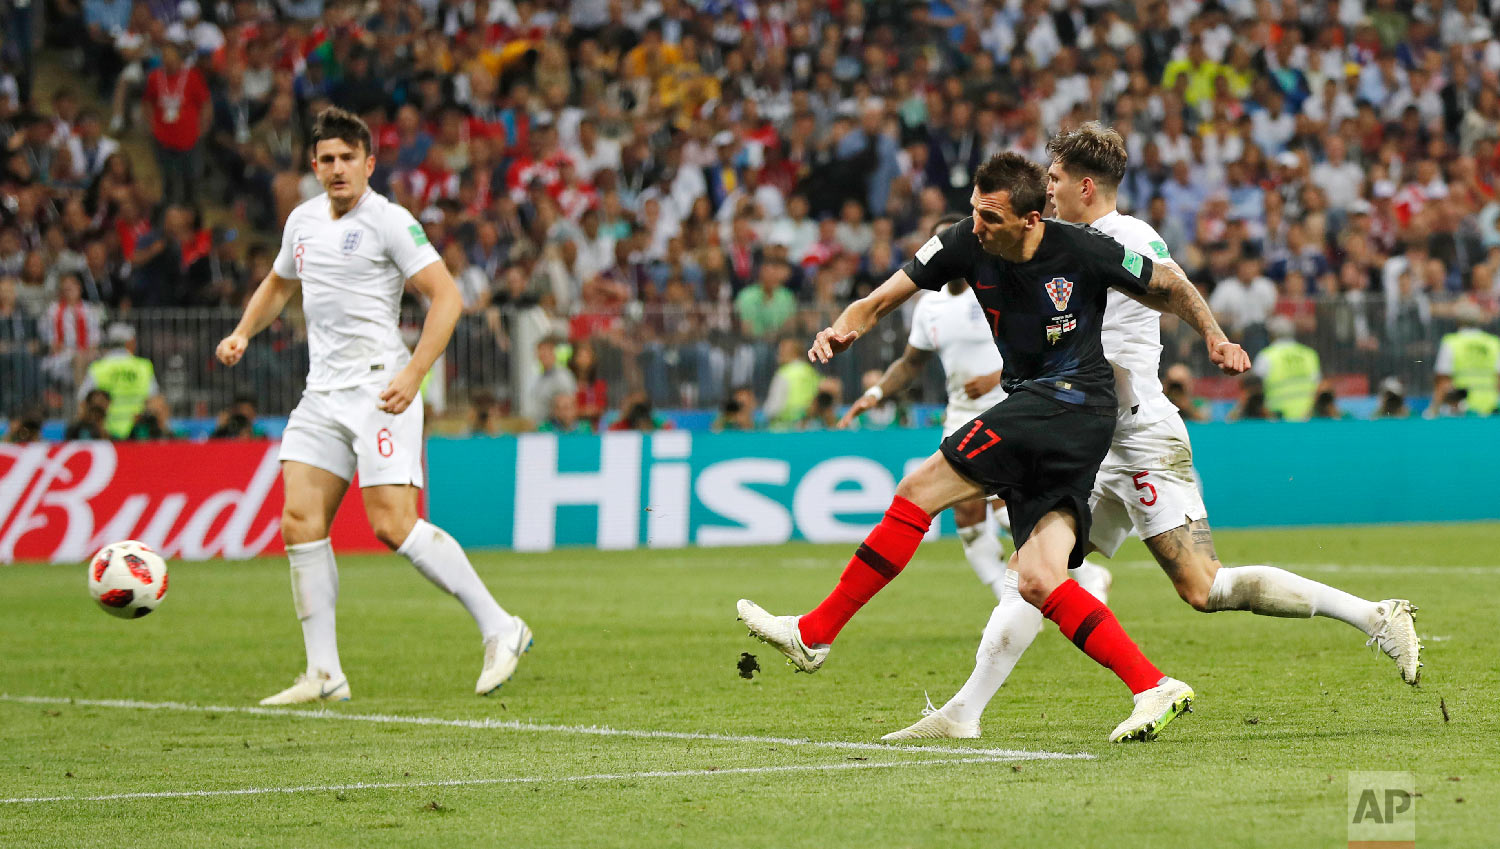  Croatia's Mario Mandzukic, second right, scores his side's second goal during the semifinal match between Croatia and England at the 2018 soccer World Cup in the Luzhniki Stadium in Moscow, Russia, Wednesday, July 11, 2018. (AP Photo/Frank Augstein)